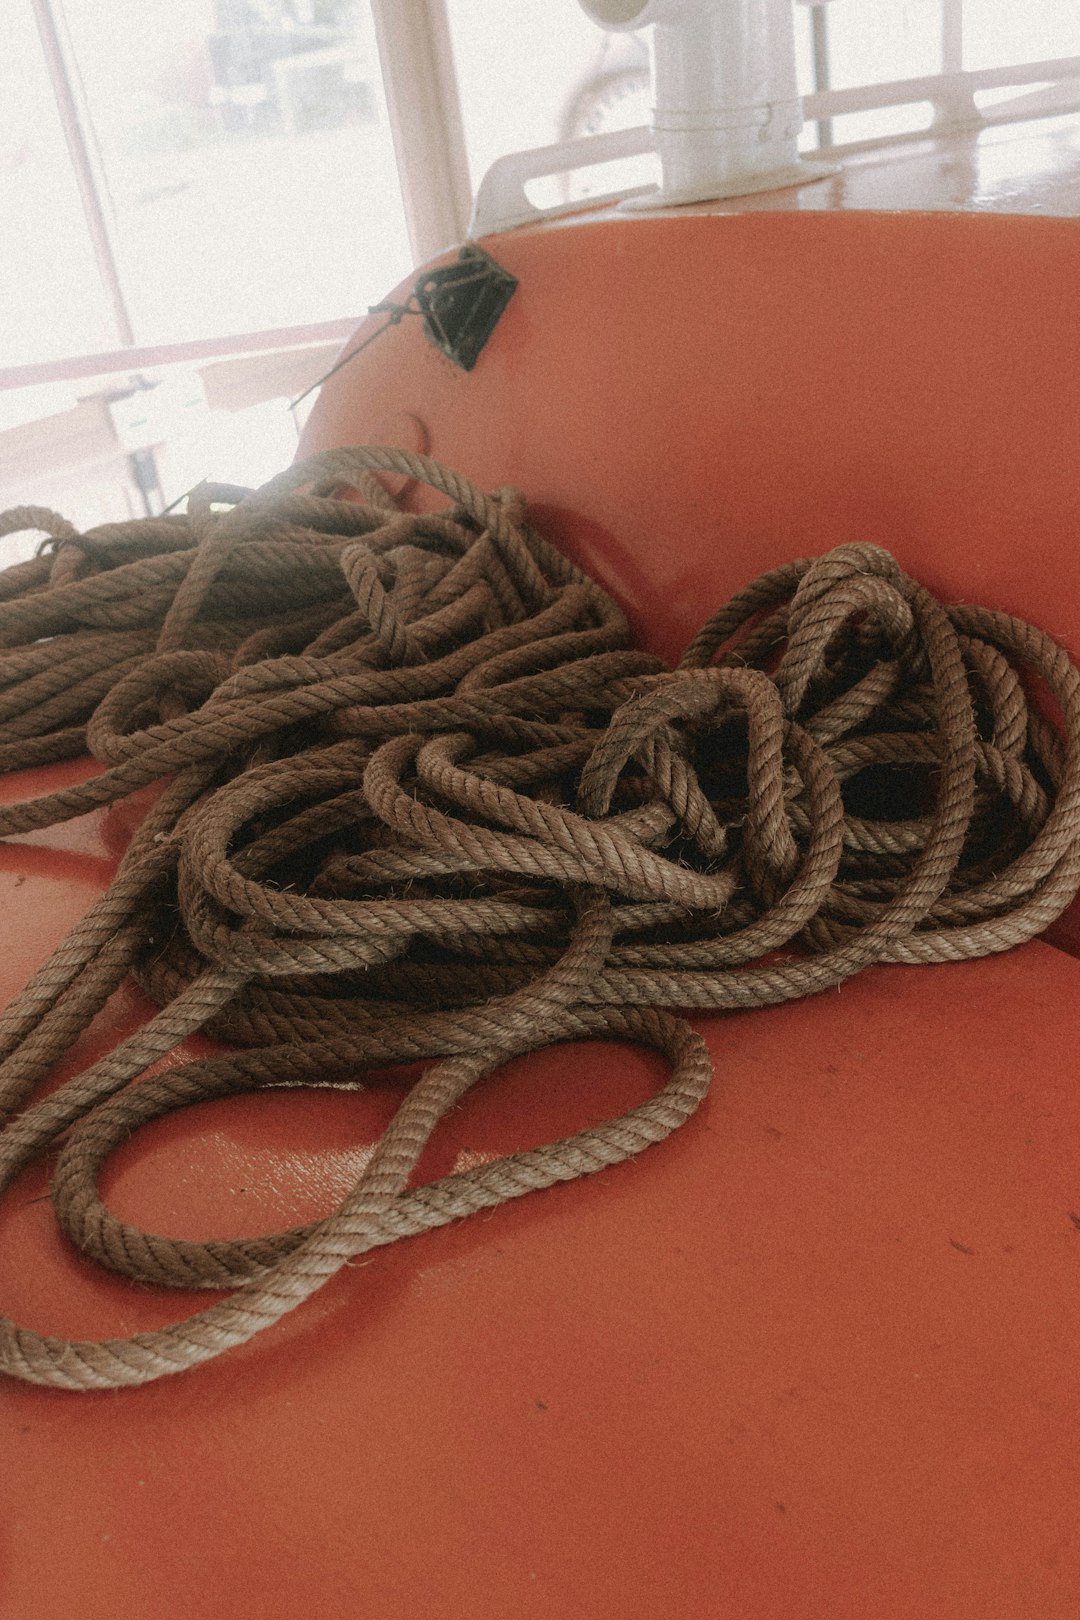 brown rope on red table